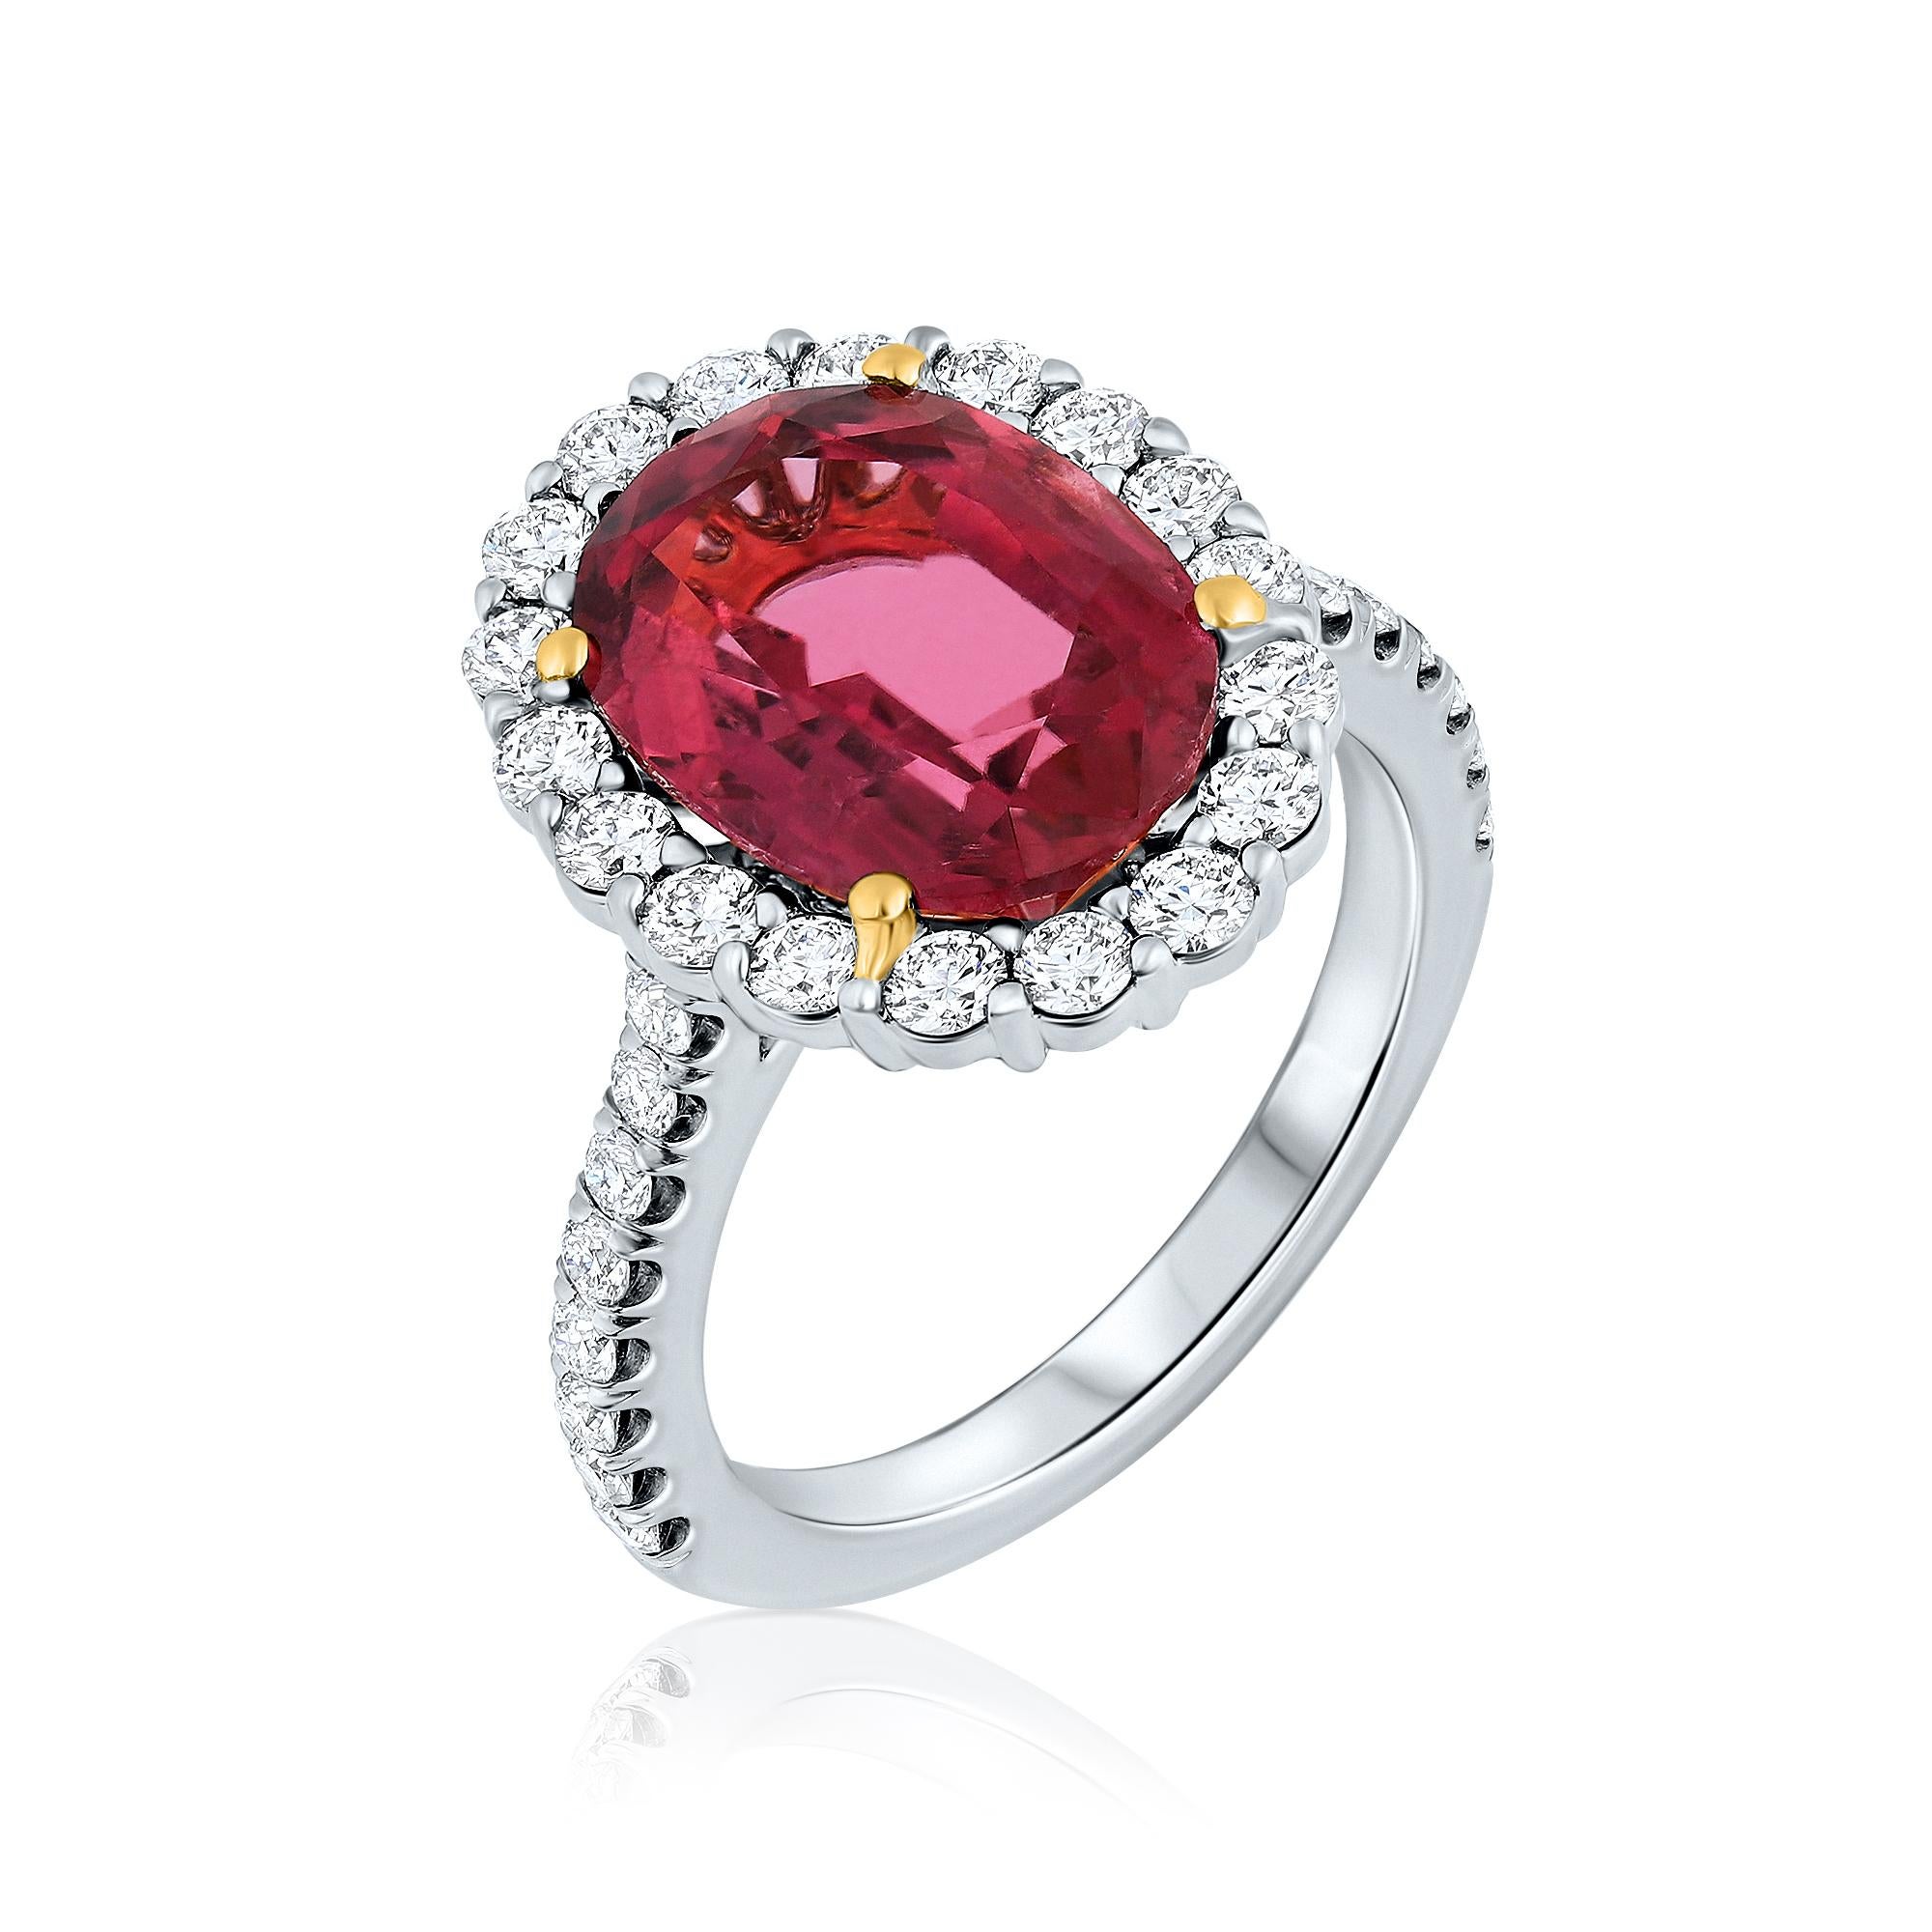 Oval Cut 5.93 Carat Red Tourmaline & Diamond Halo Cocktail Ring, set in 18K Gold. For Sale